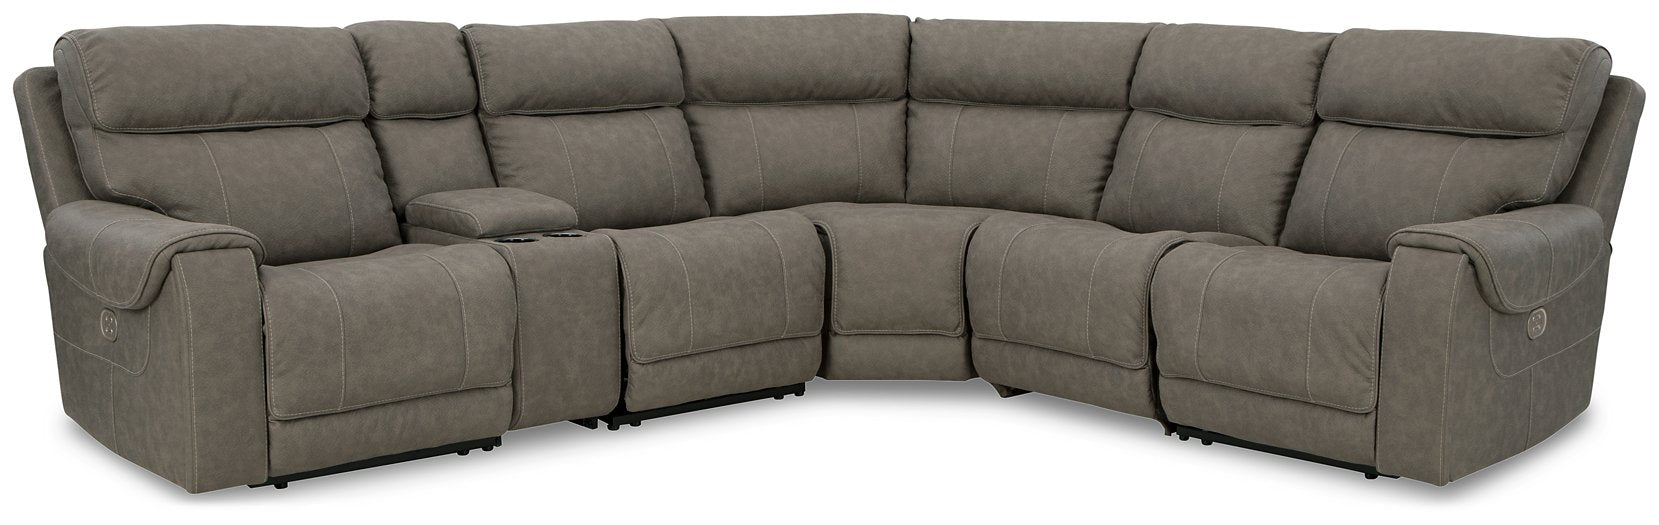 Starbot Power Reclining Sectional - Hometown Comfort Station